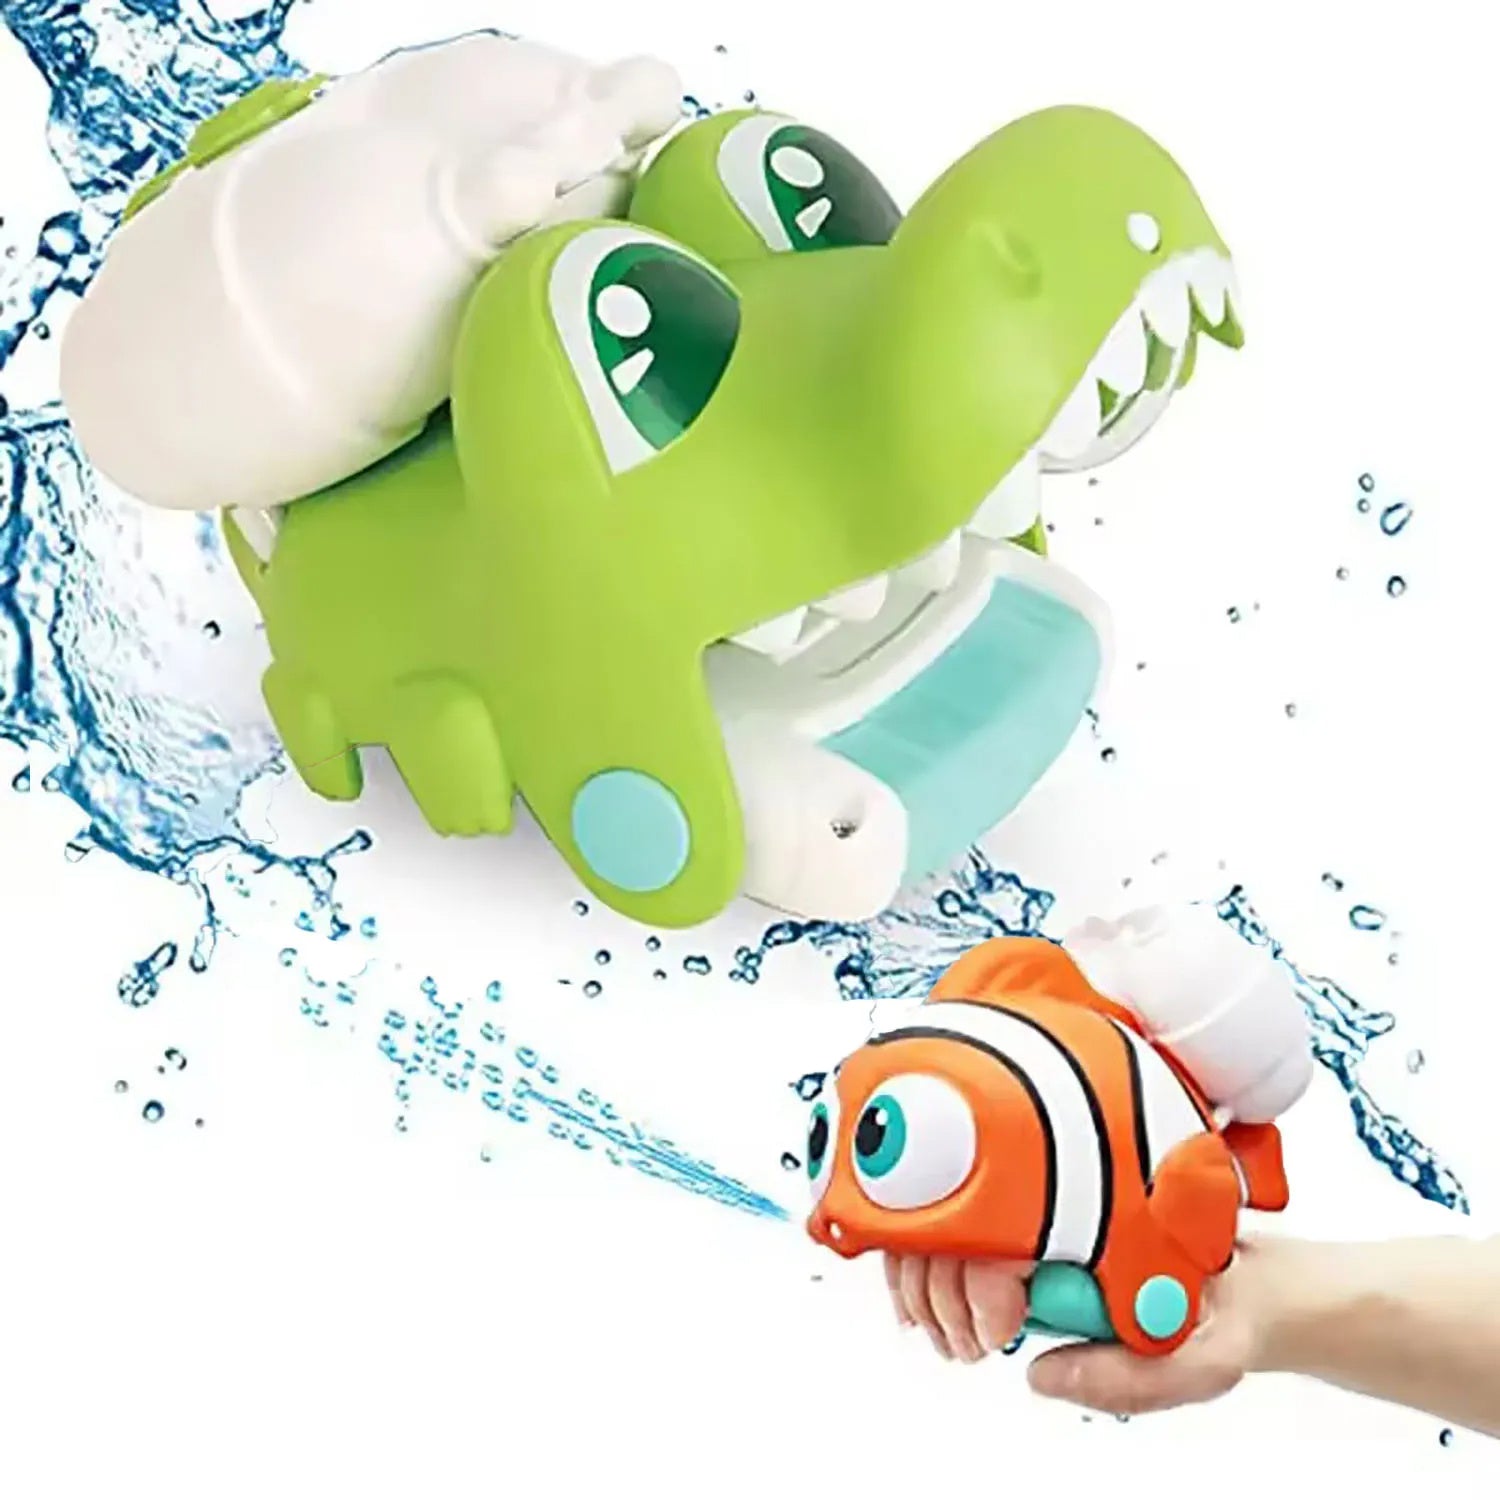 Beach Water Toys for Kids - Handheld Water Blaster for Outdoor Fun & Multiplayer Games